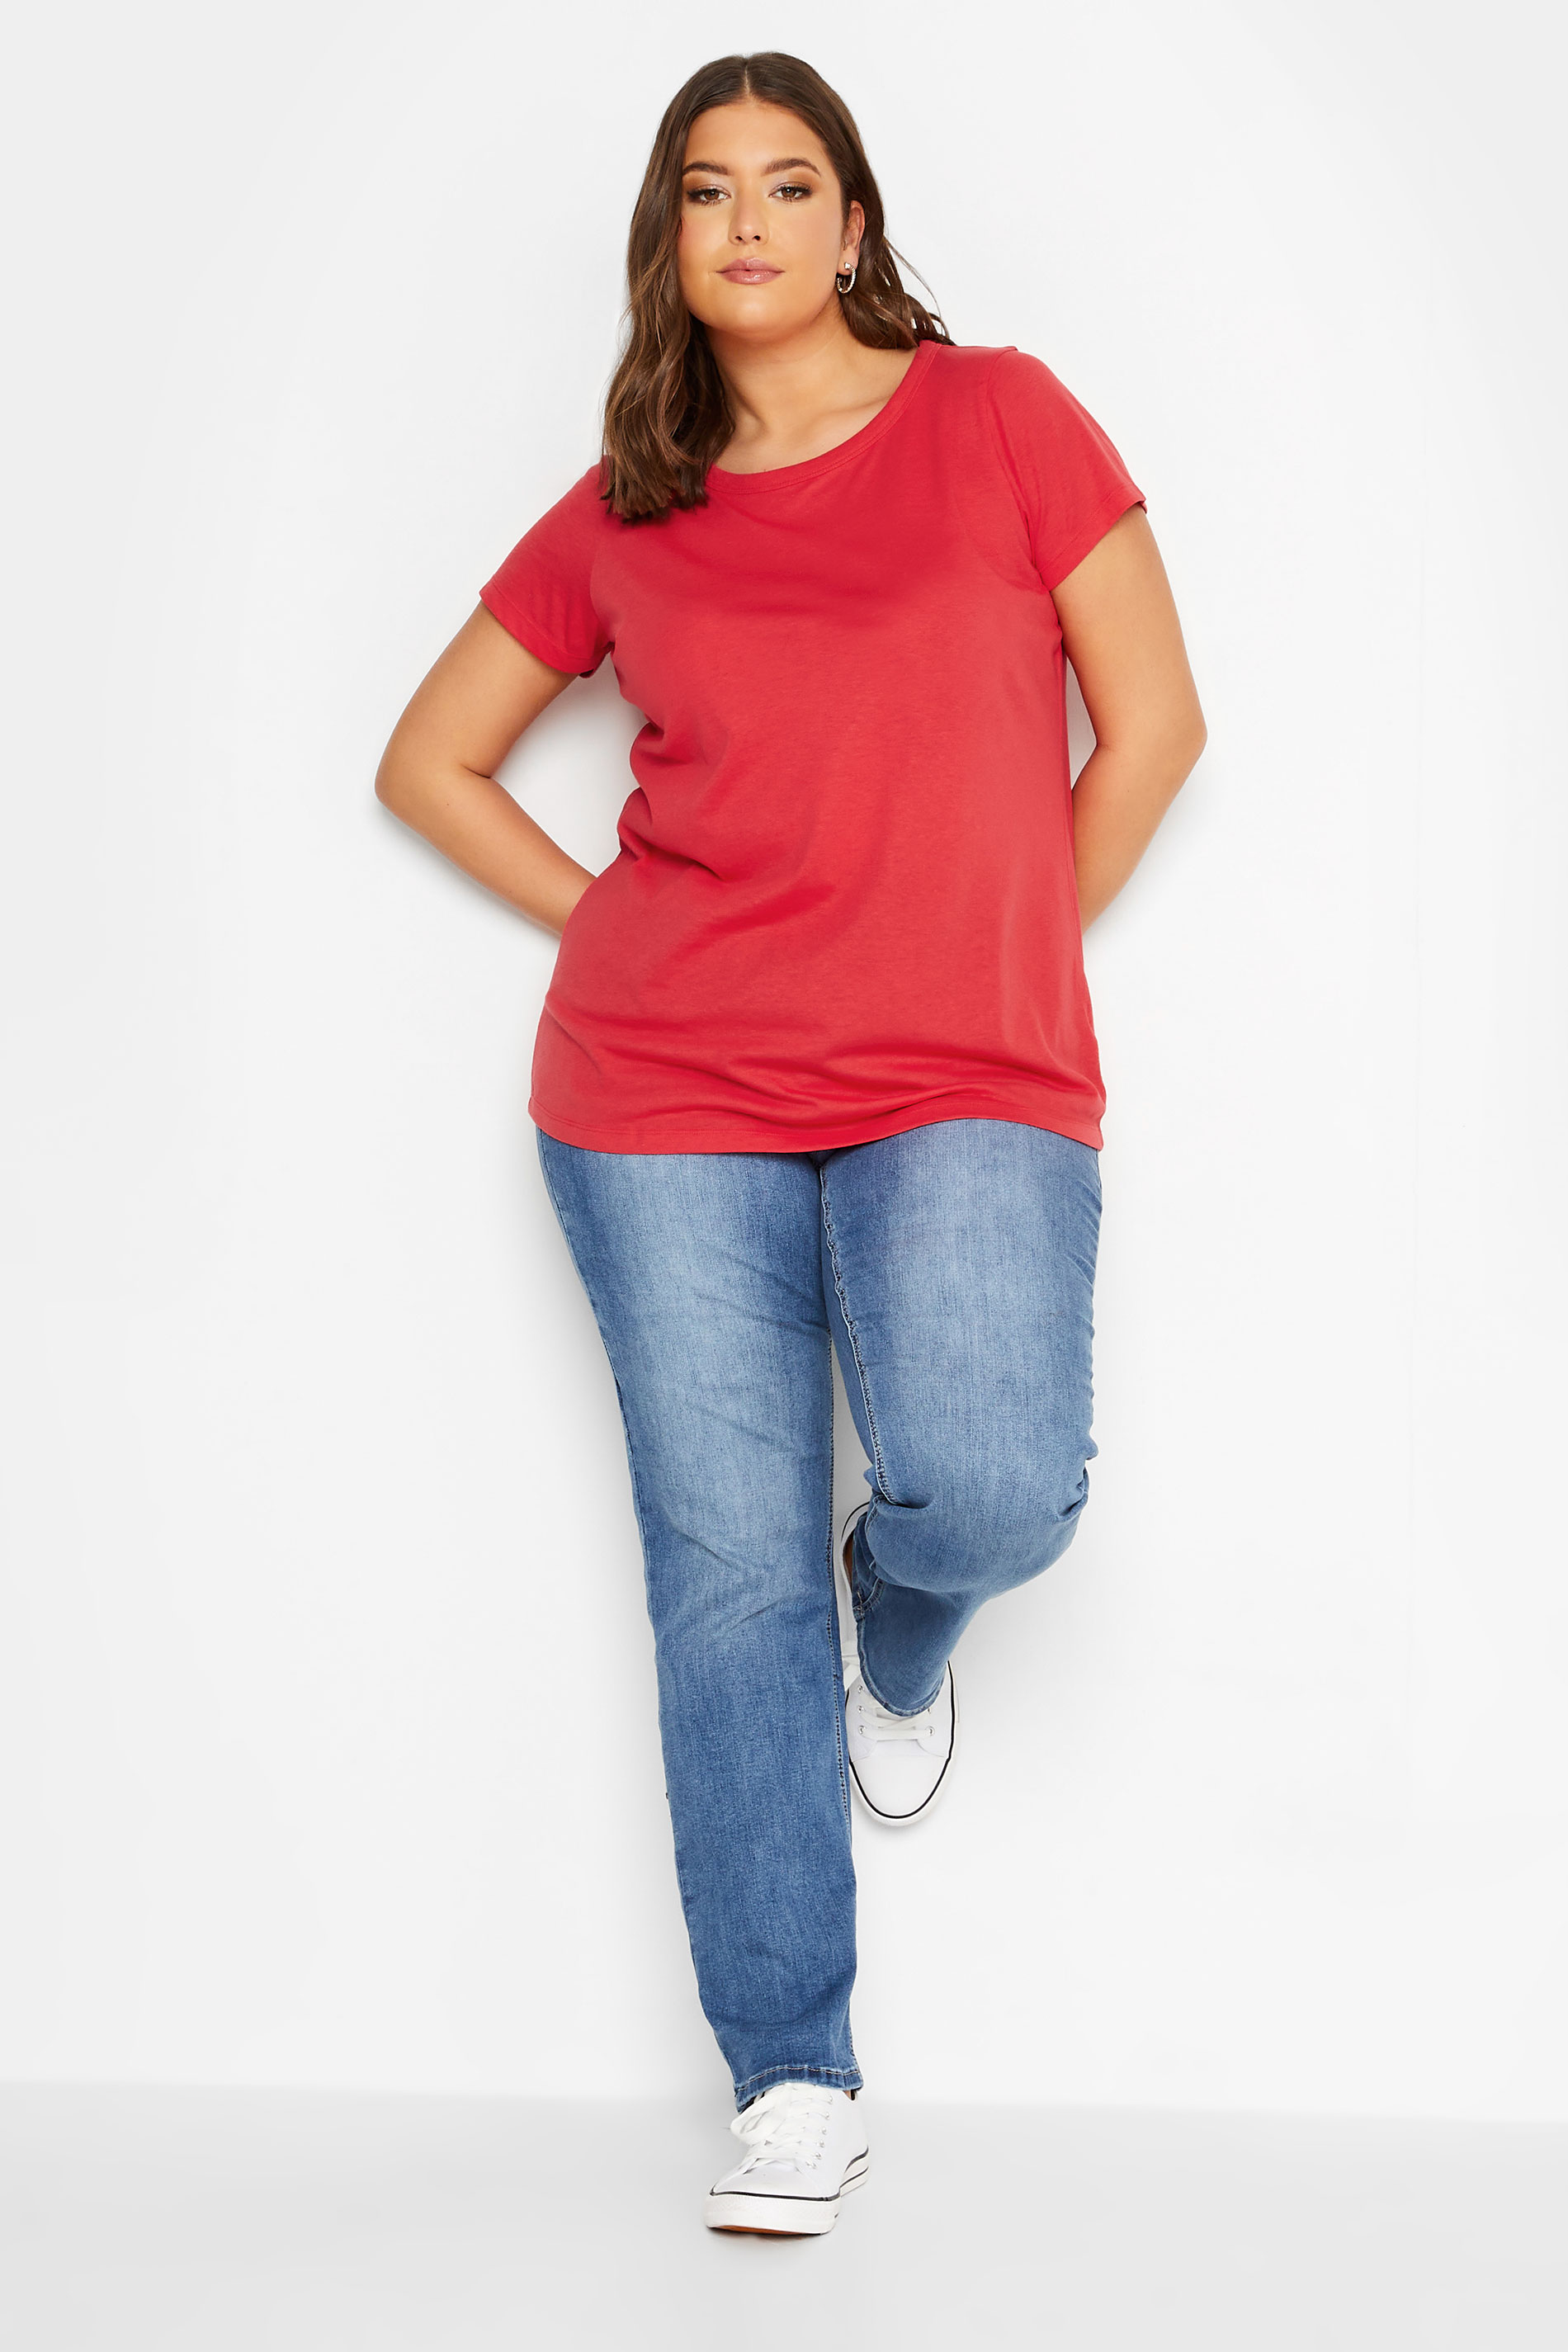 YOURS Curve Plus Size 3 PACK Red & White Essential T-Shirts | Yours Clothing  3